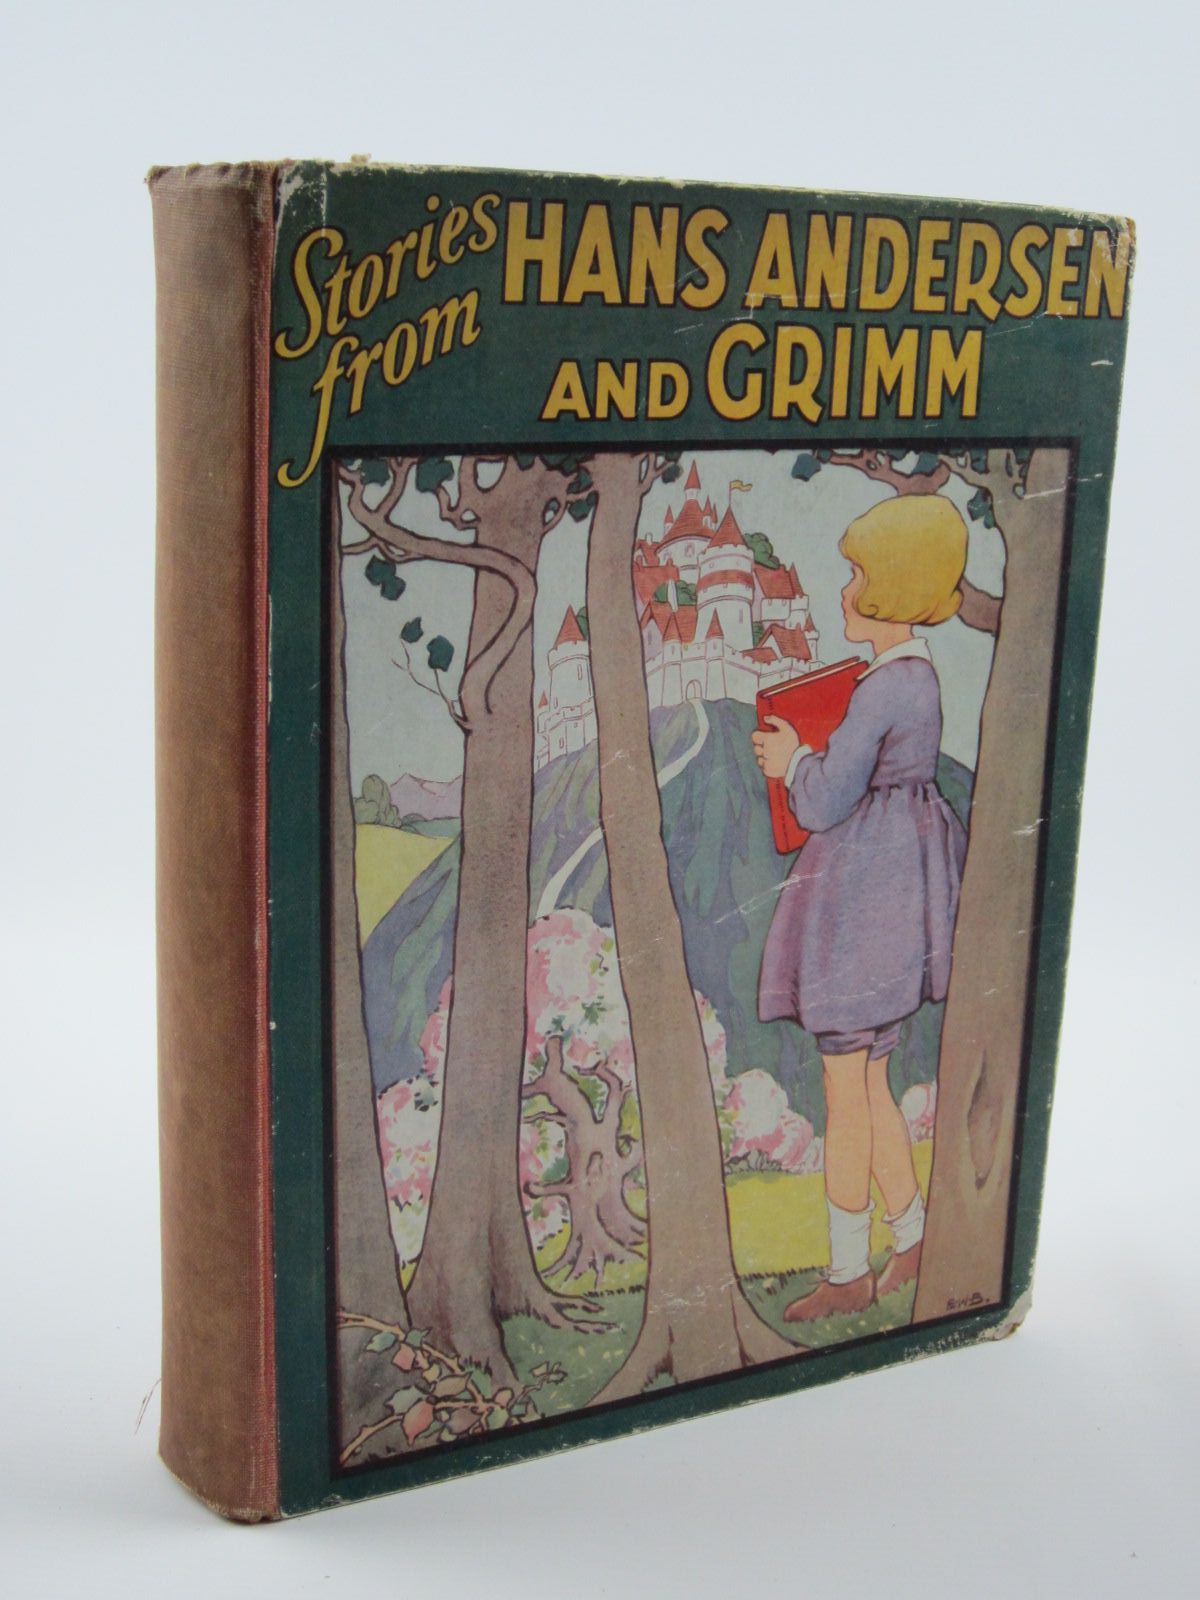 Photo of STORIES FROM HANS ANDERSEN AND GRIMM written by Andersen, Hans Christian
Grimm, Brothers illustrated by Clarke, Harry
Betts, Ethel Franklin published by J. Coker & Co. (STOCK CODE: 1309679)  for sale by Stella & Rose's Books